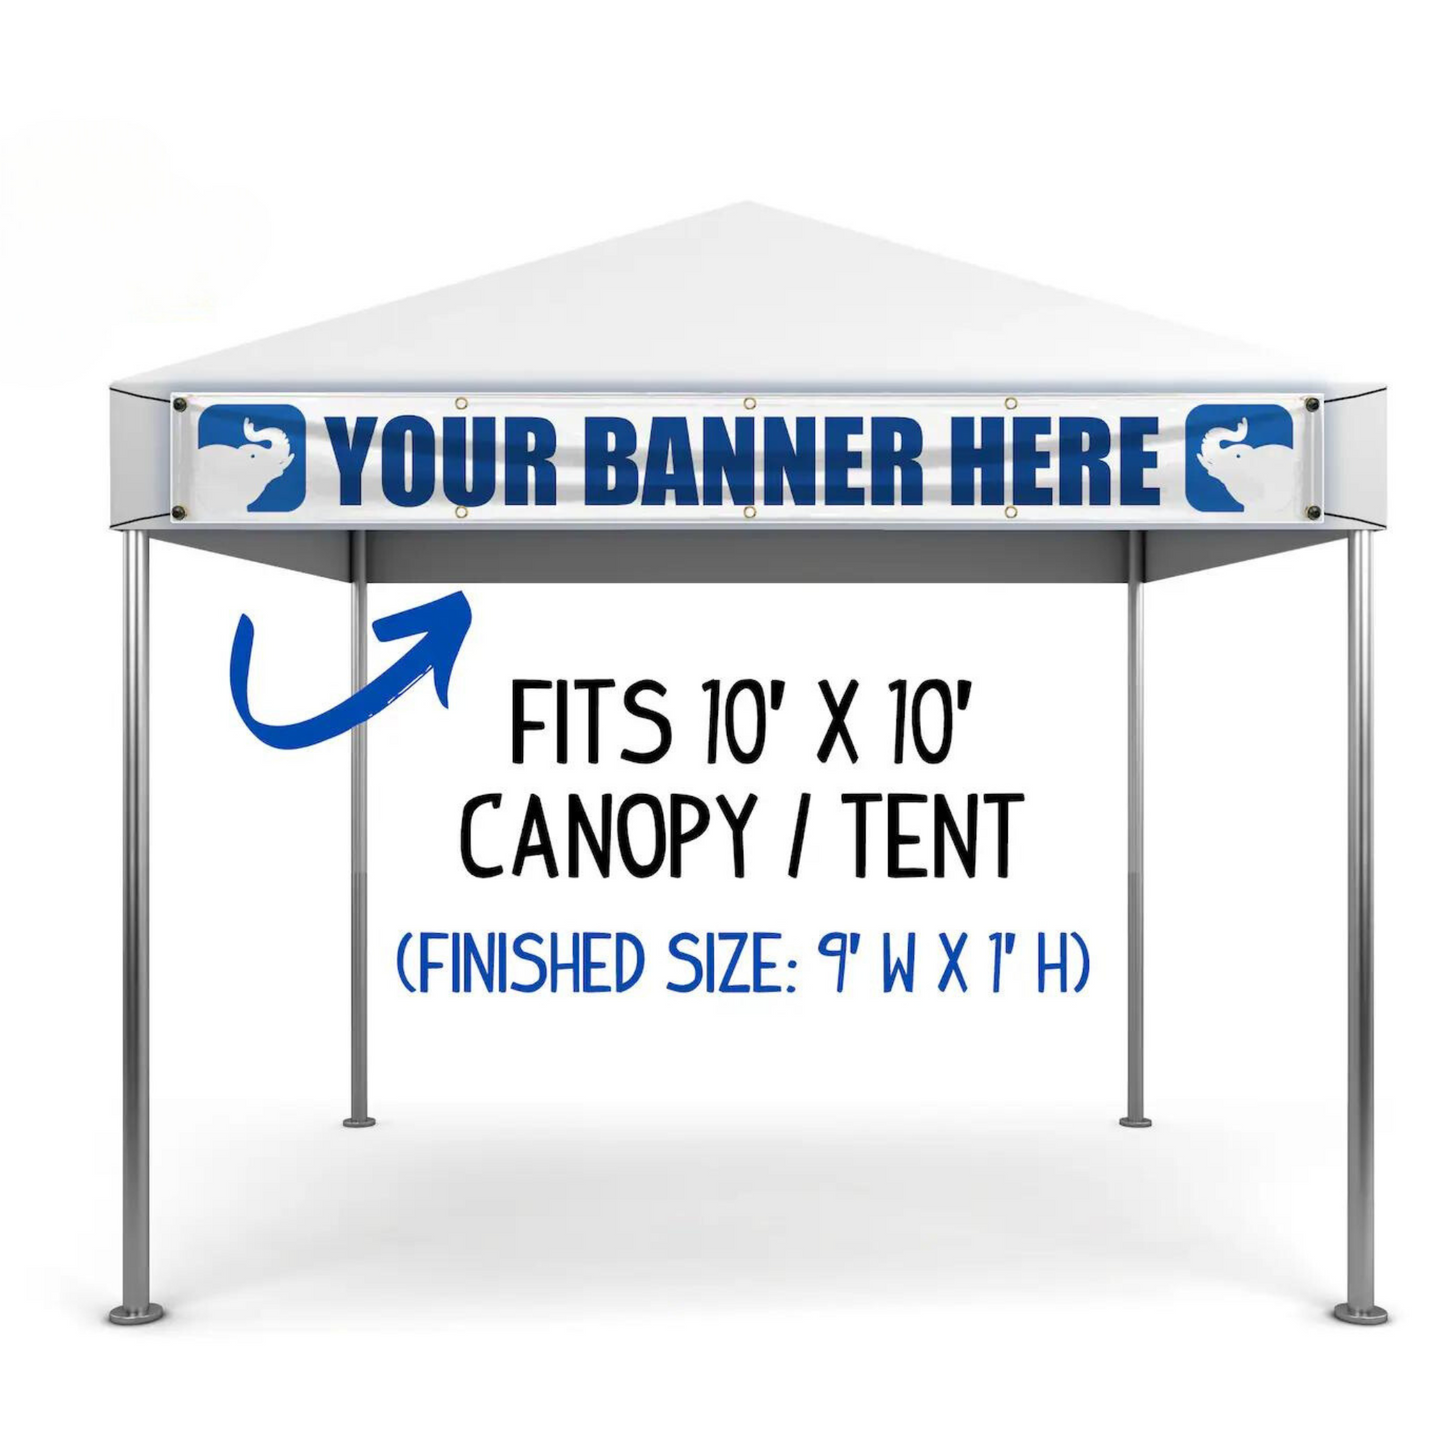 Canopy Banner Combo $35